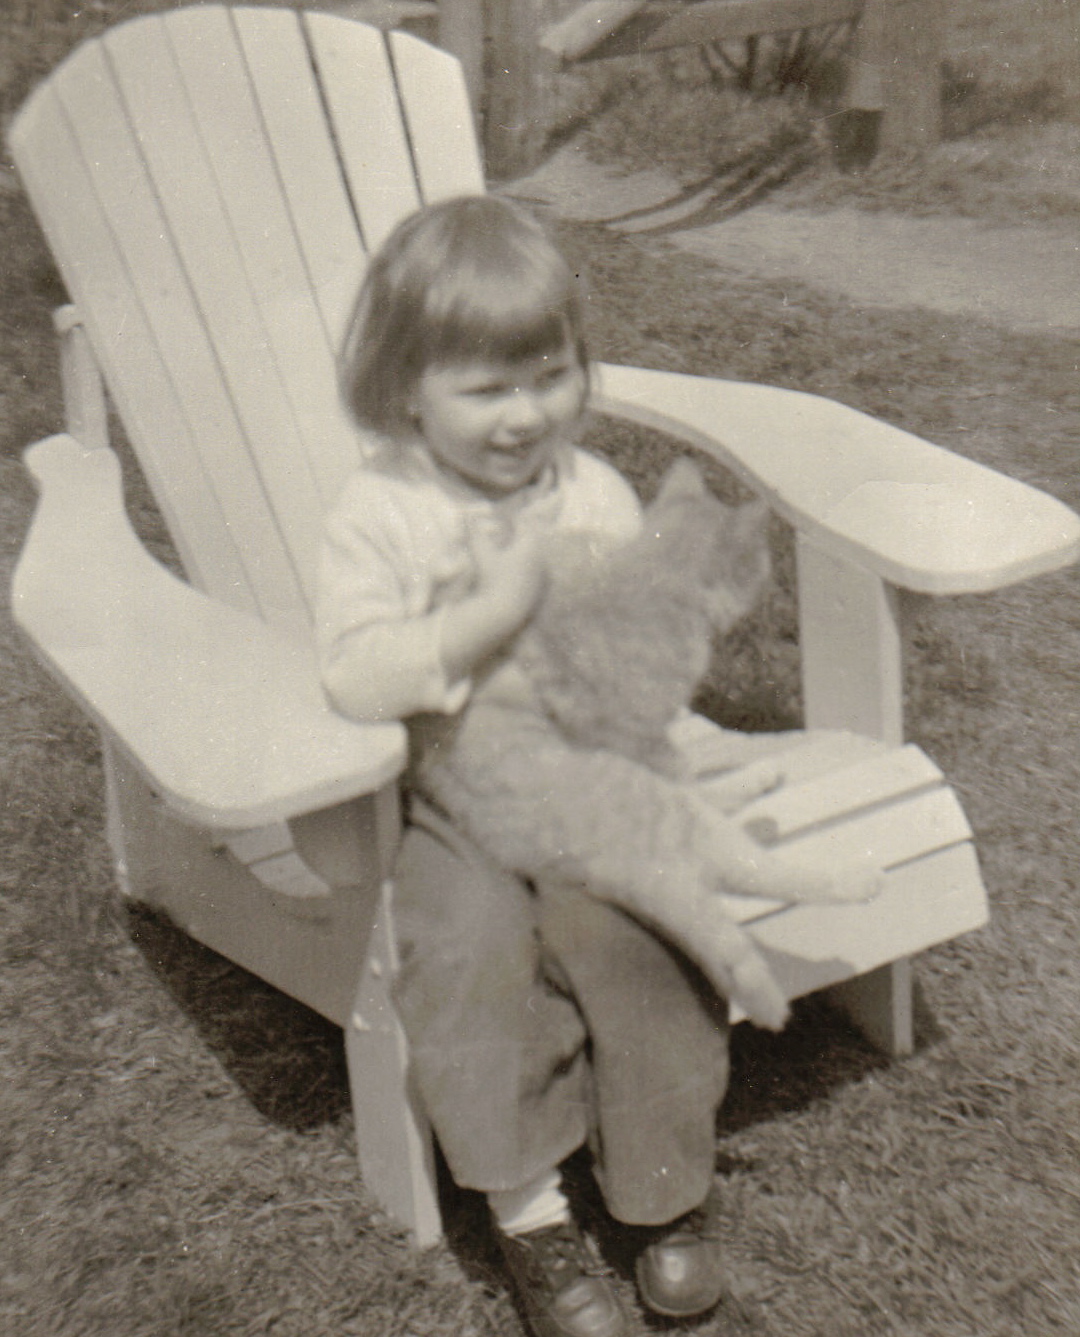 Donna-as-child-with-cat-on-lap1